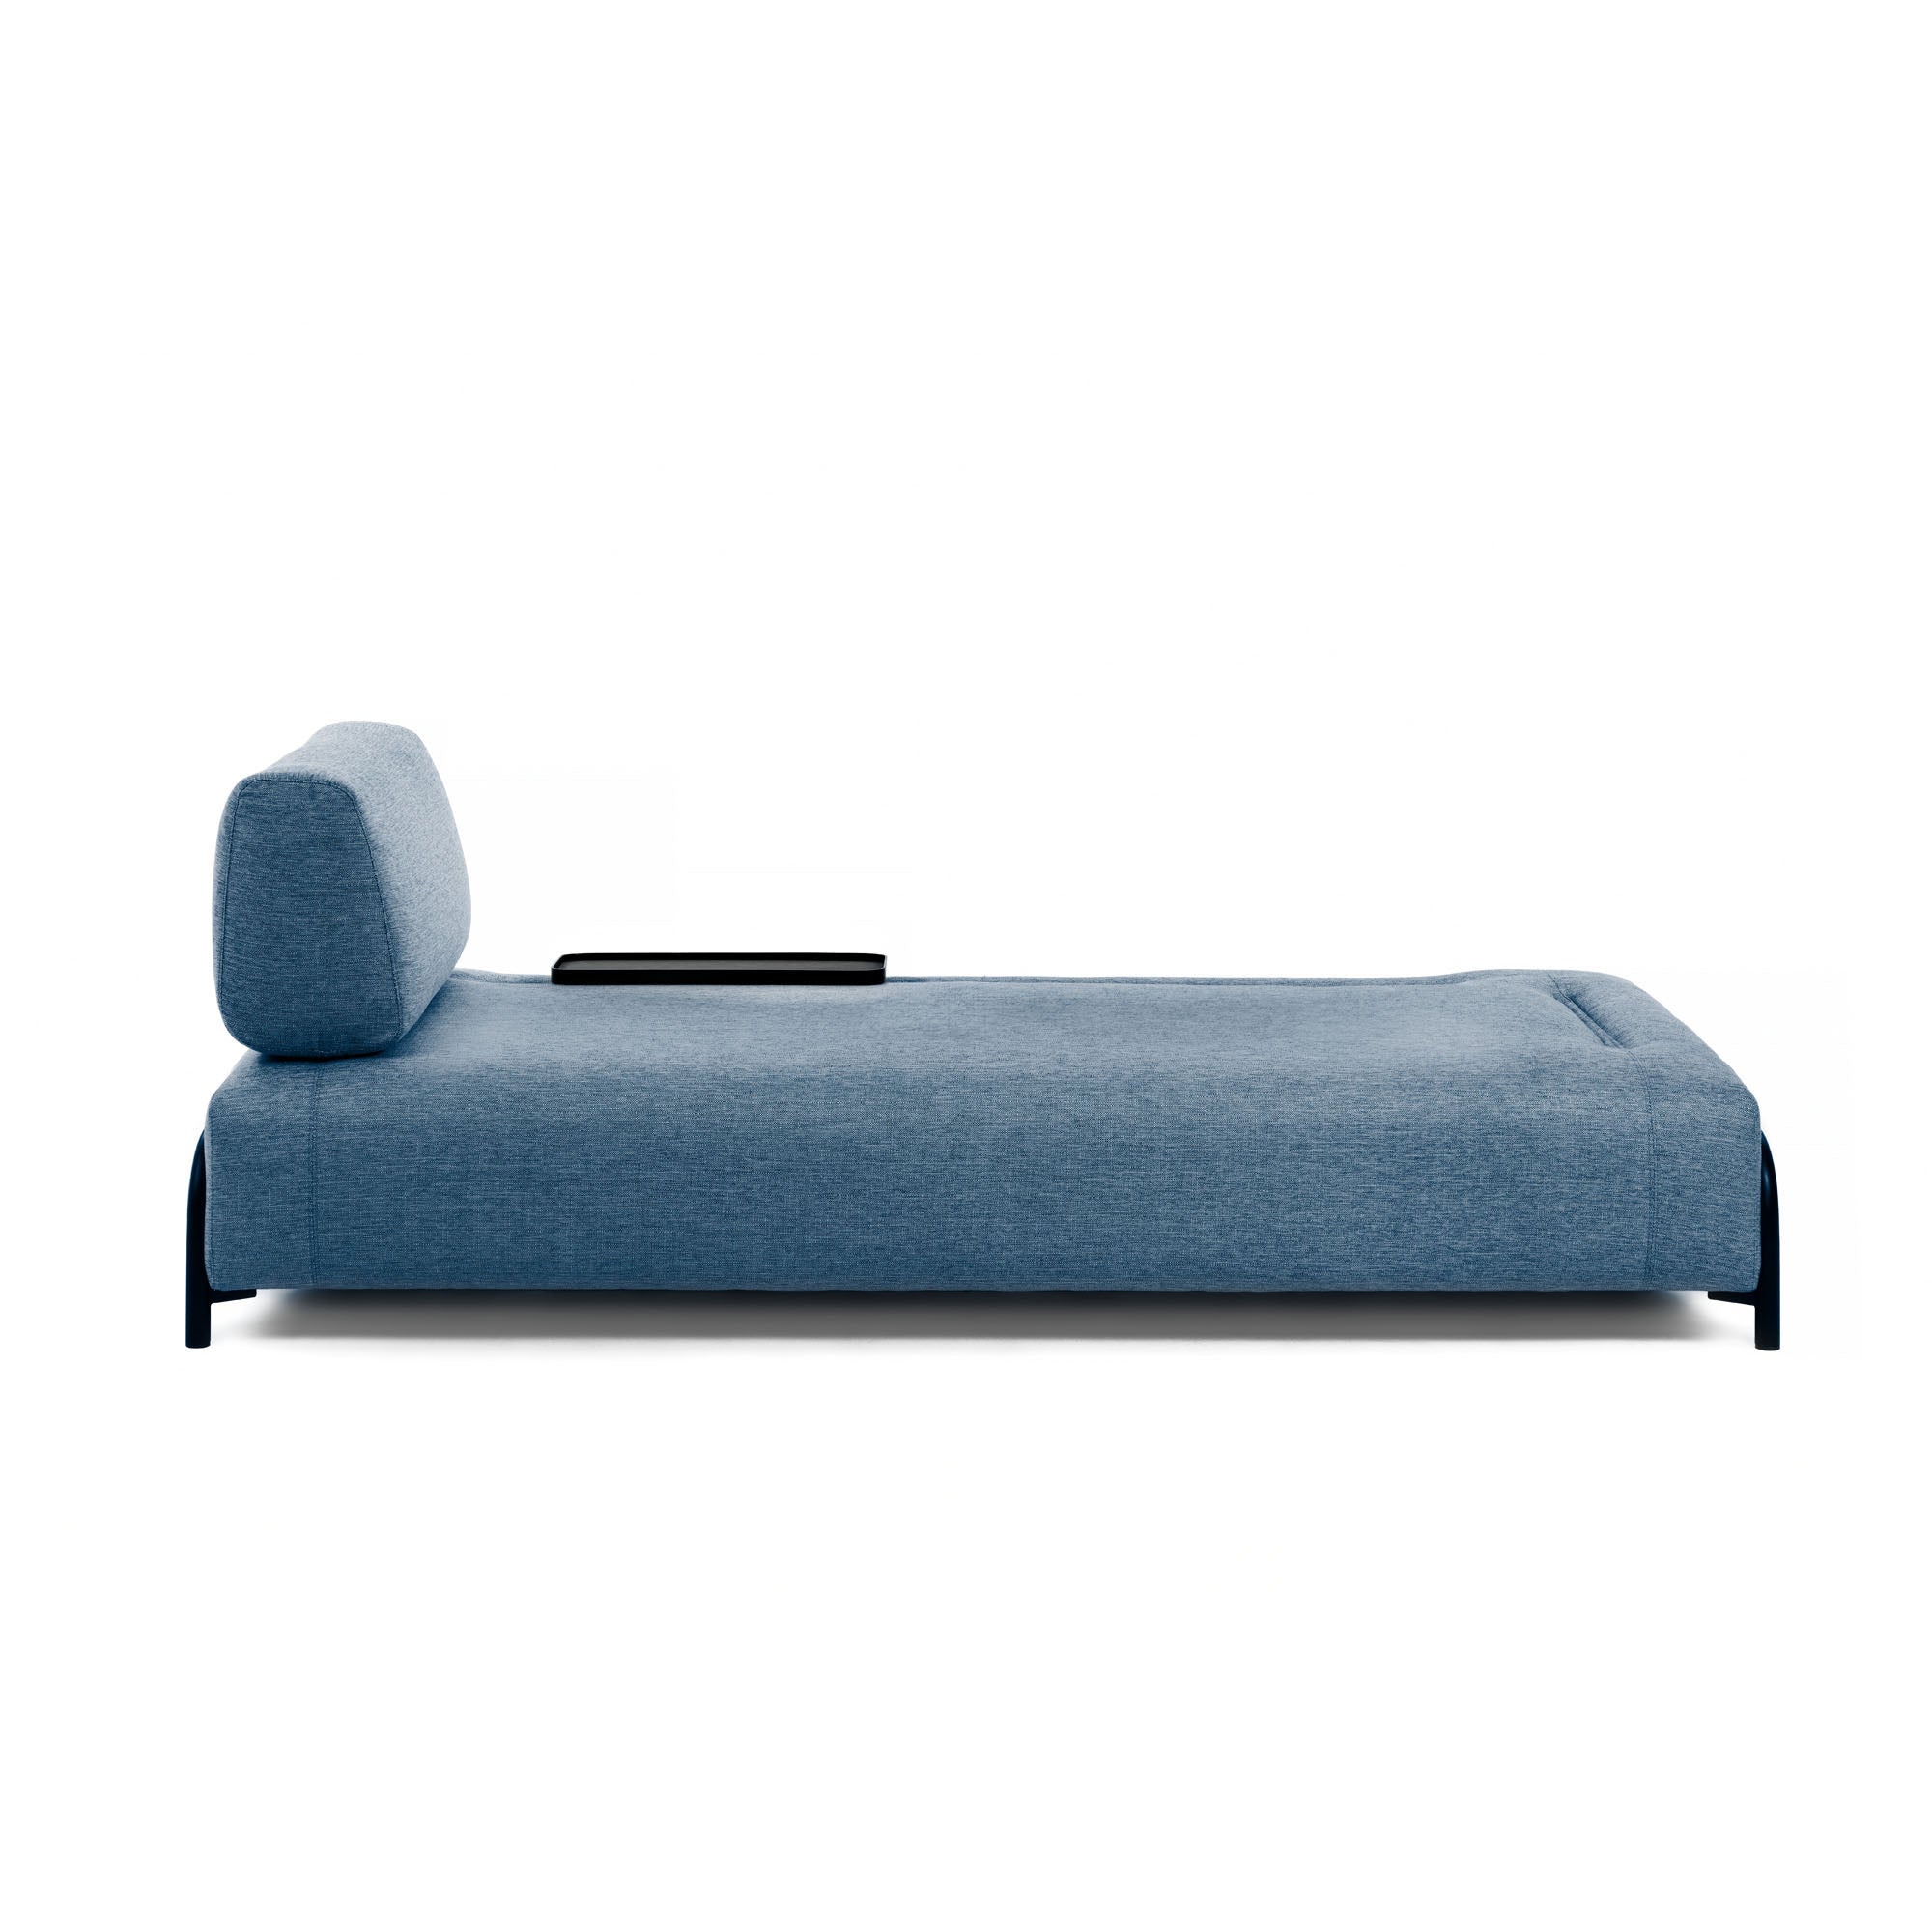 Compo 3-seater sofa in blue with small tray 232 cm